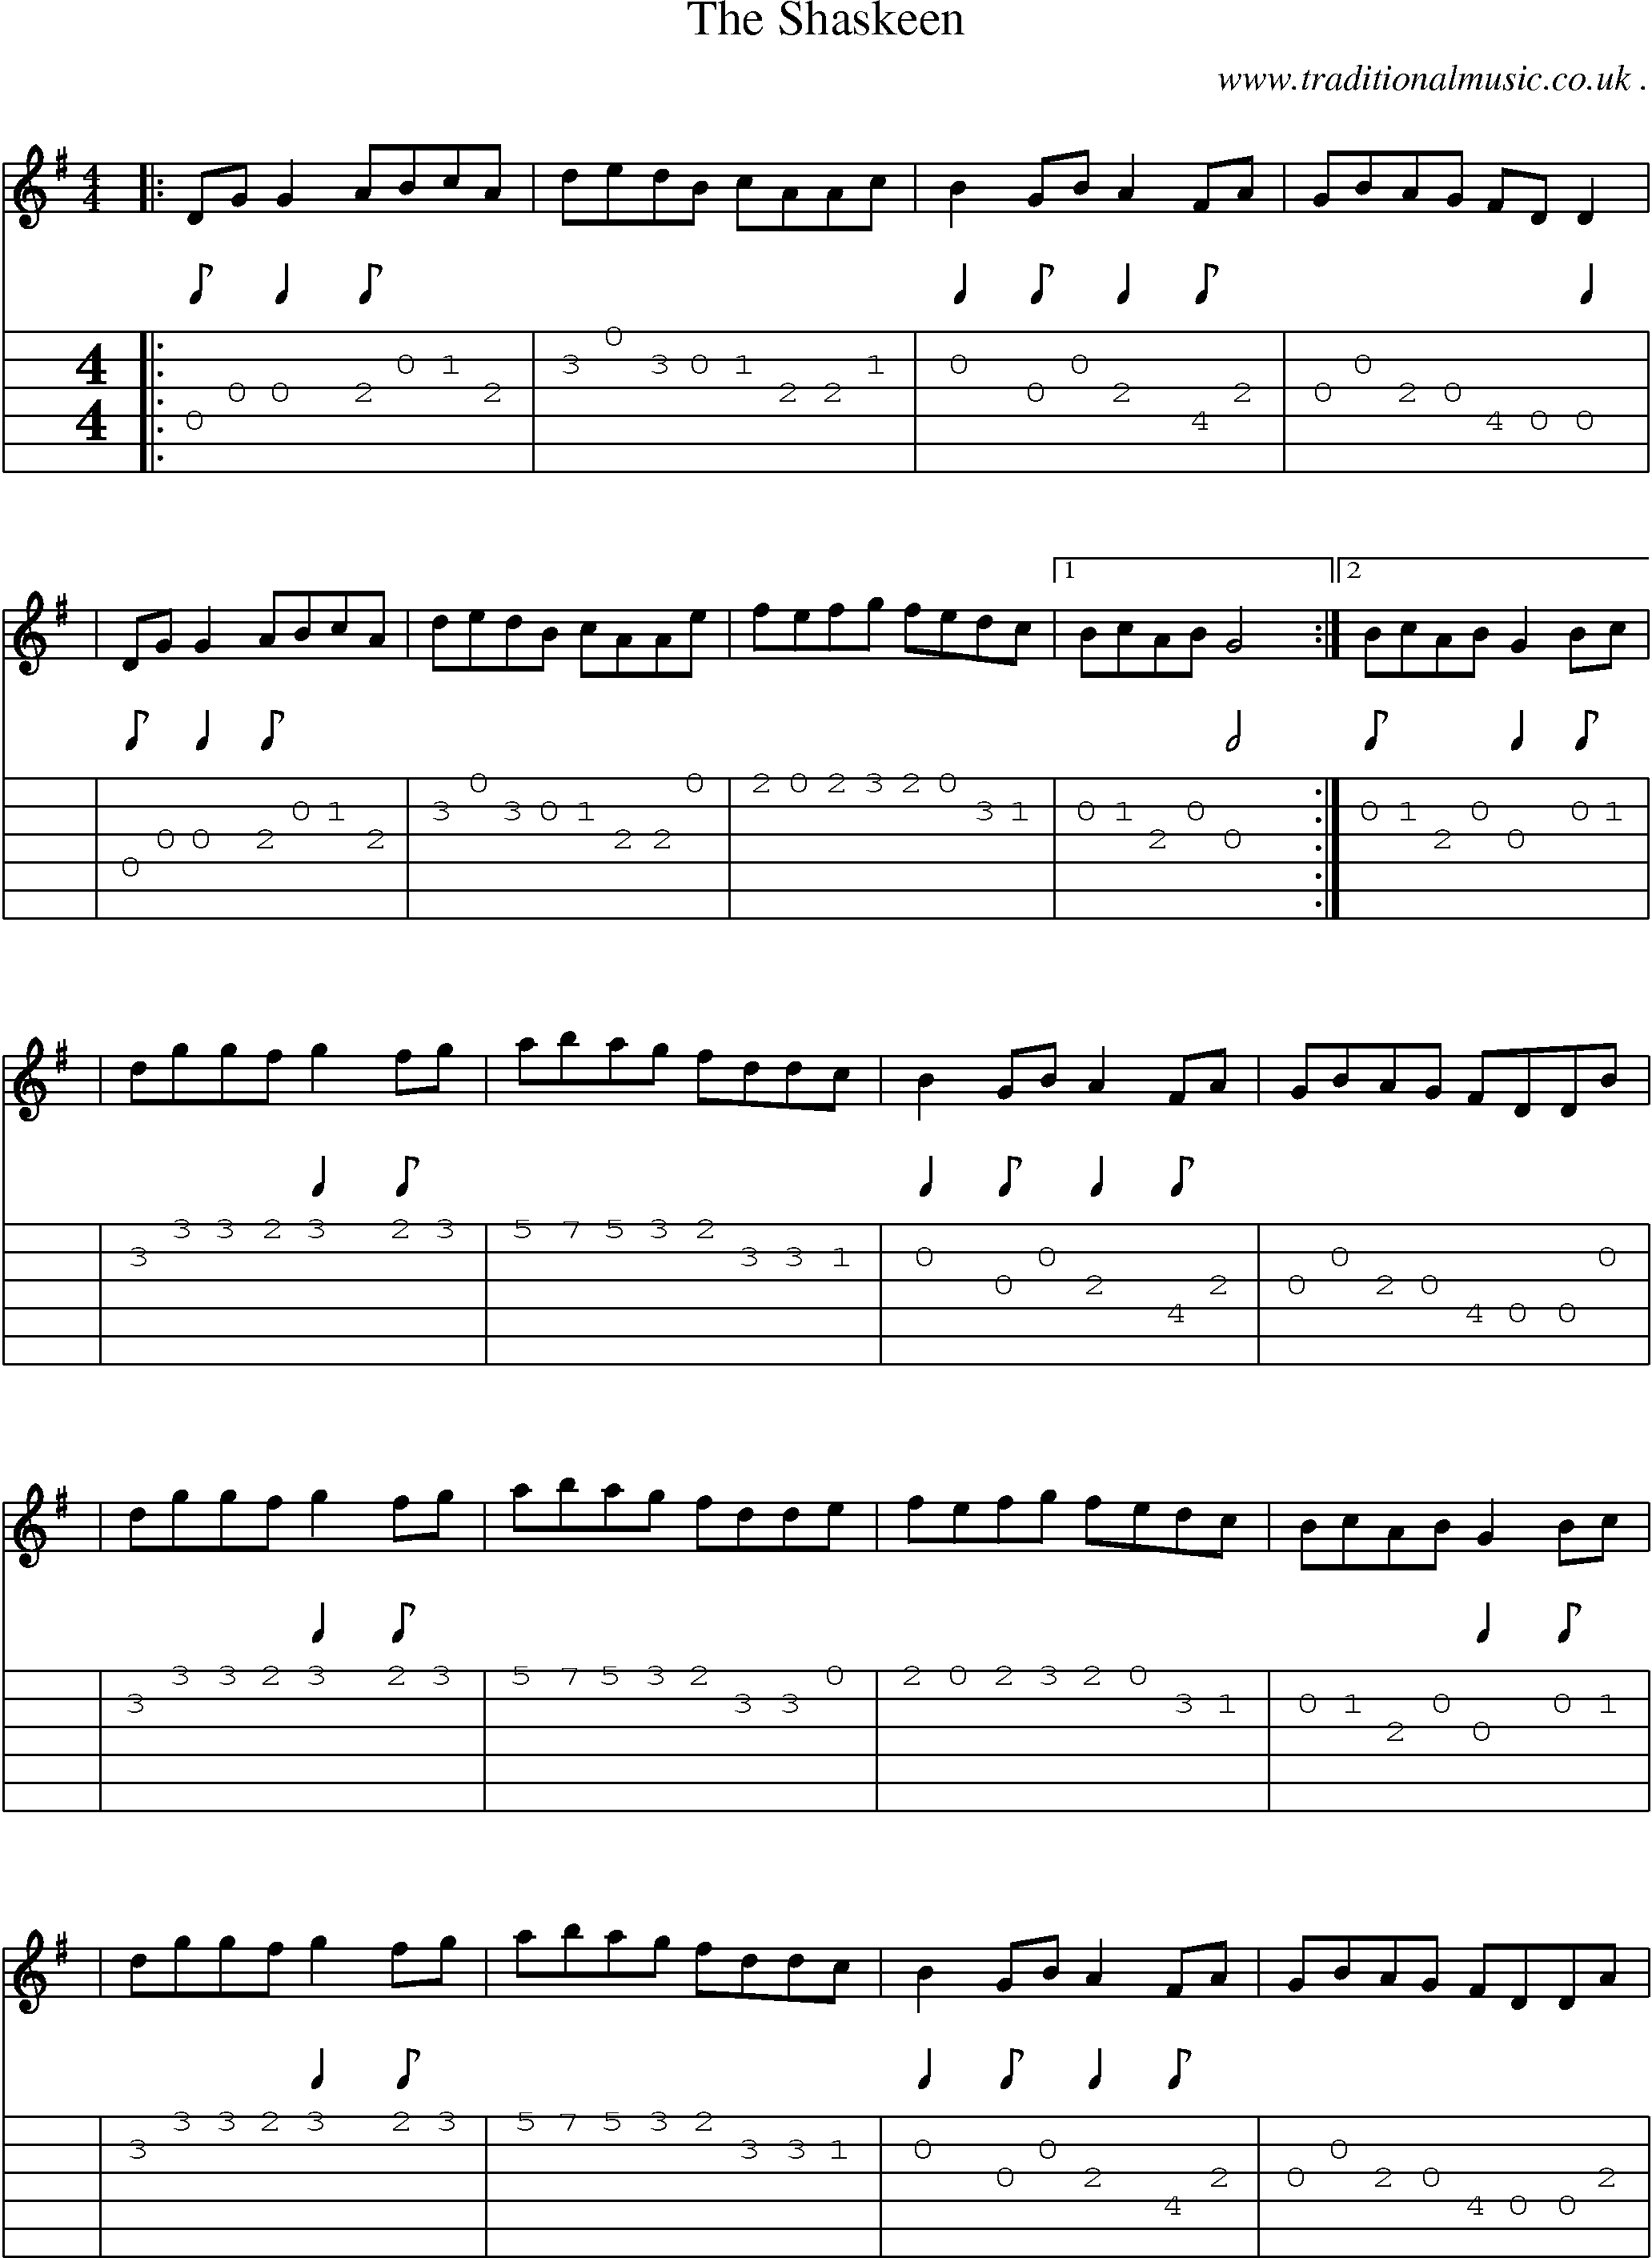 Sheet-Music and Guitar Tabs for The Shaskeen